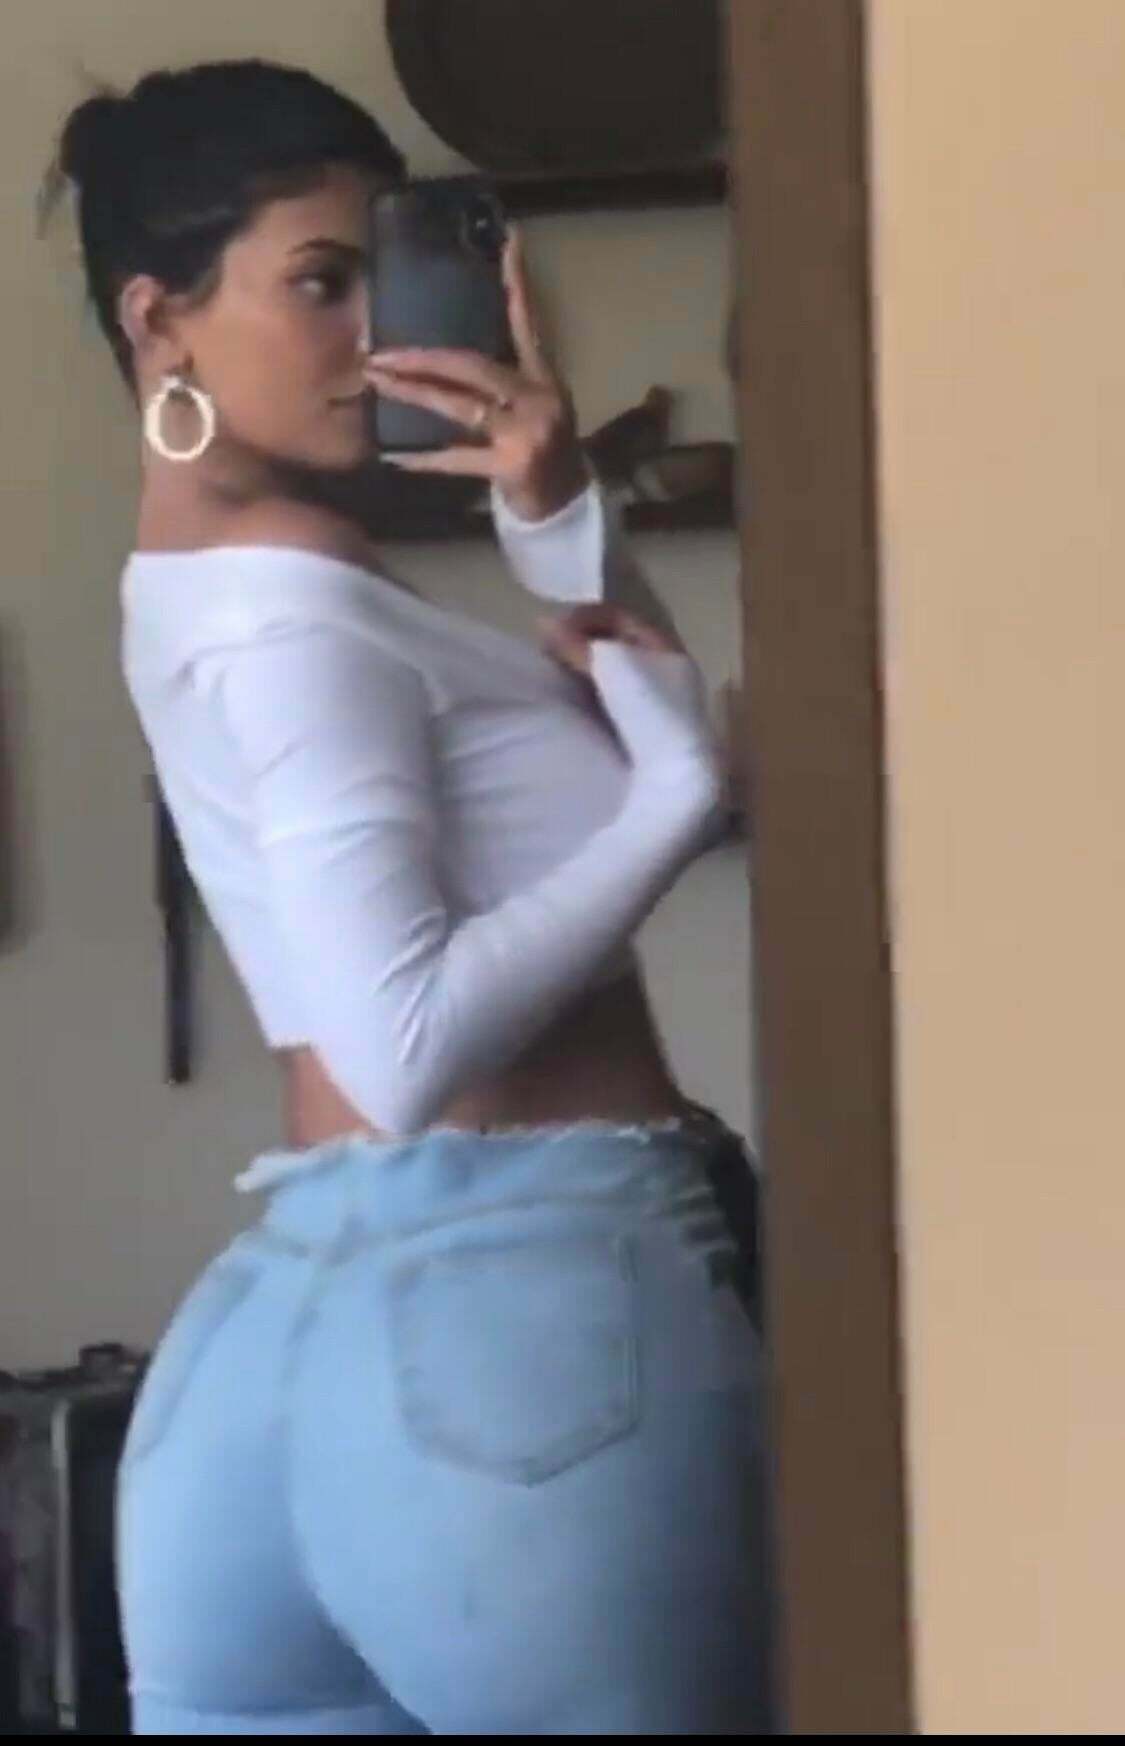 Kylie Jenner needs atleast two cocks shoved in her ass